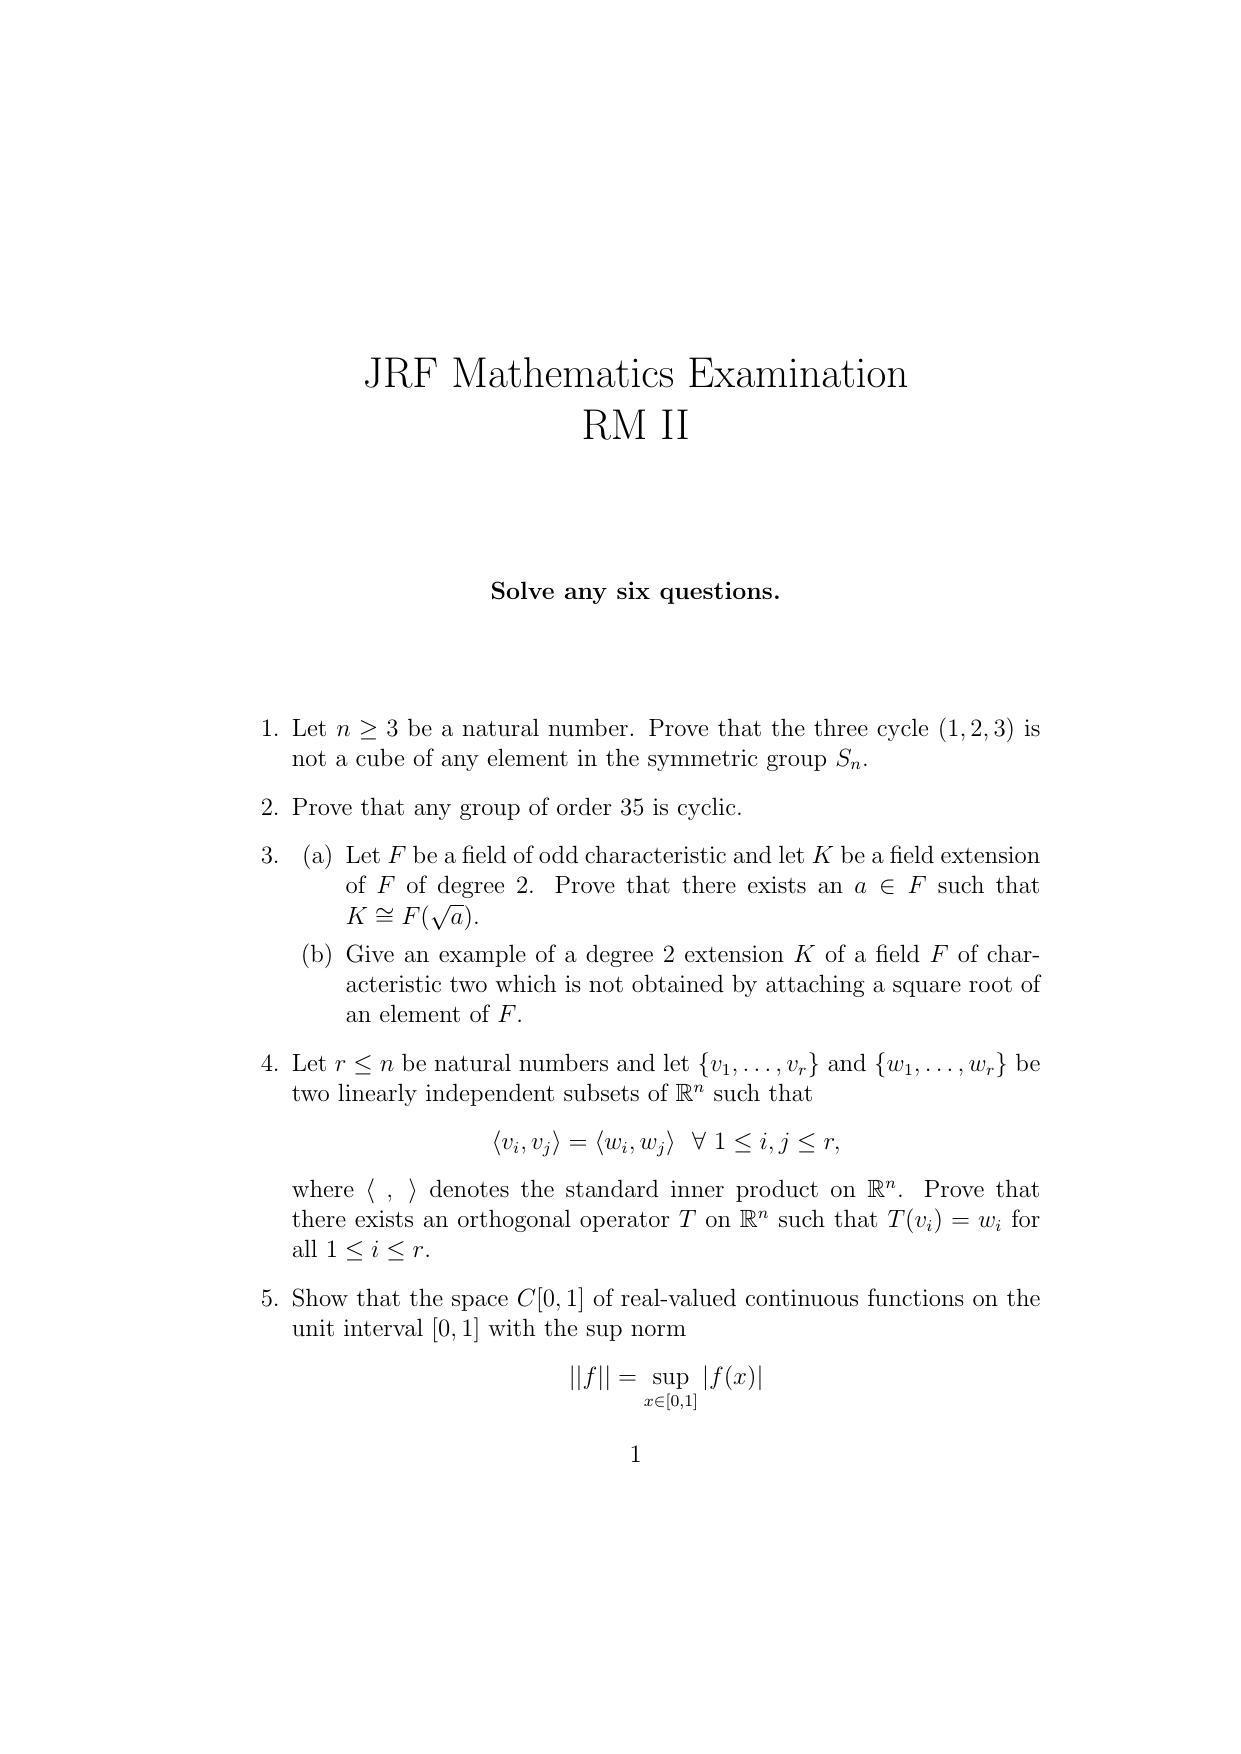 ISI Admission Test JRF in Mathematics MTB 2016 Sample Paper - Page 1